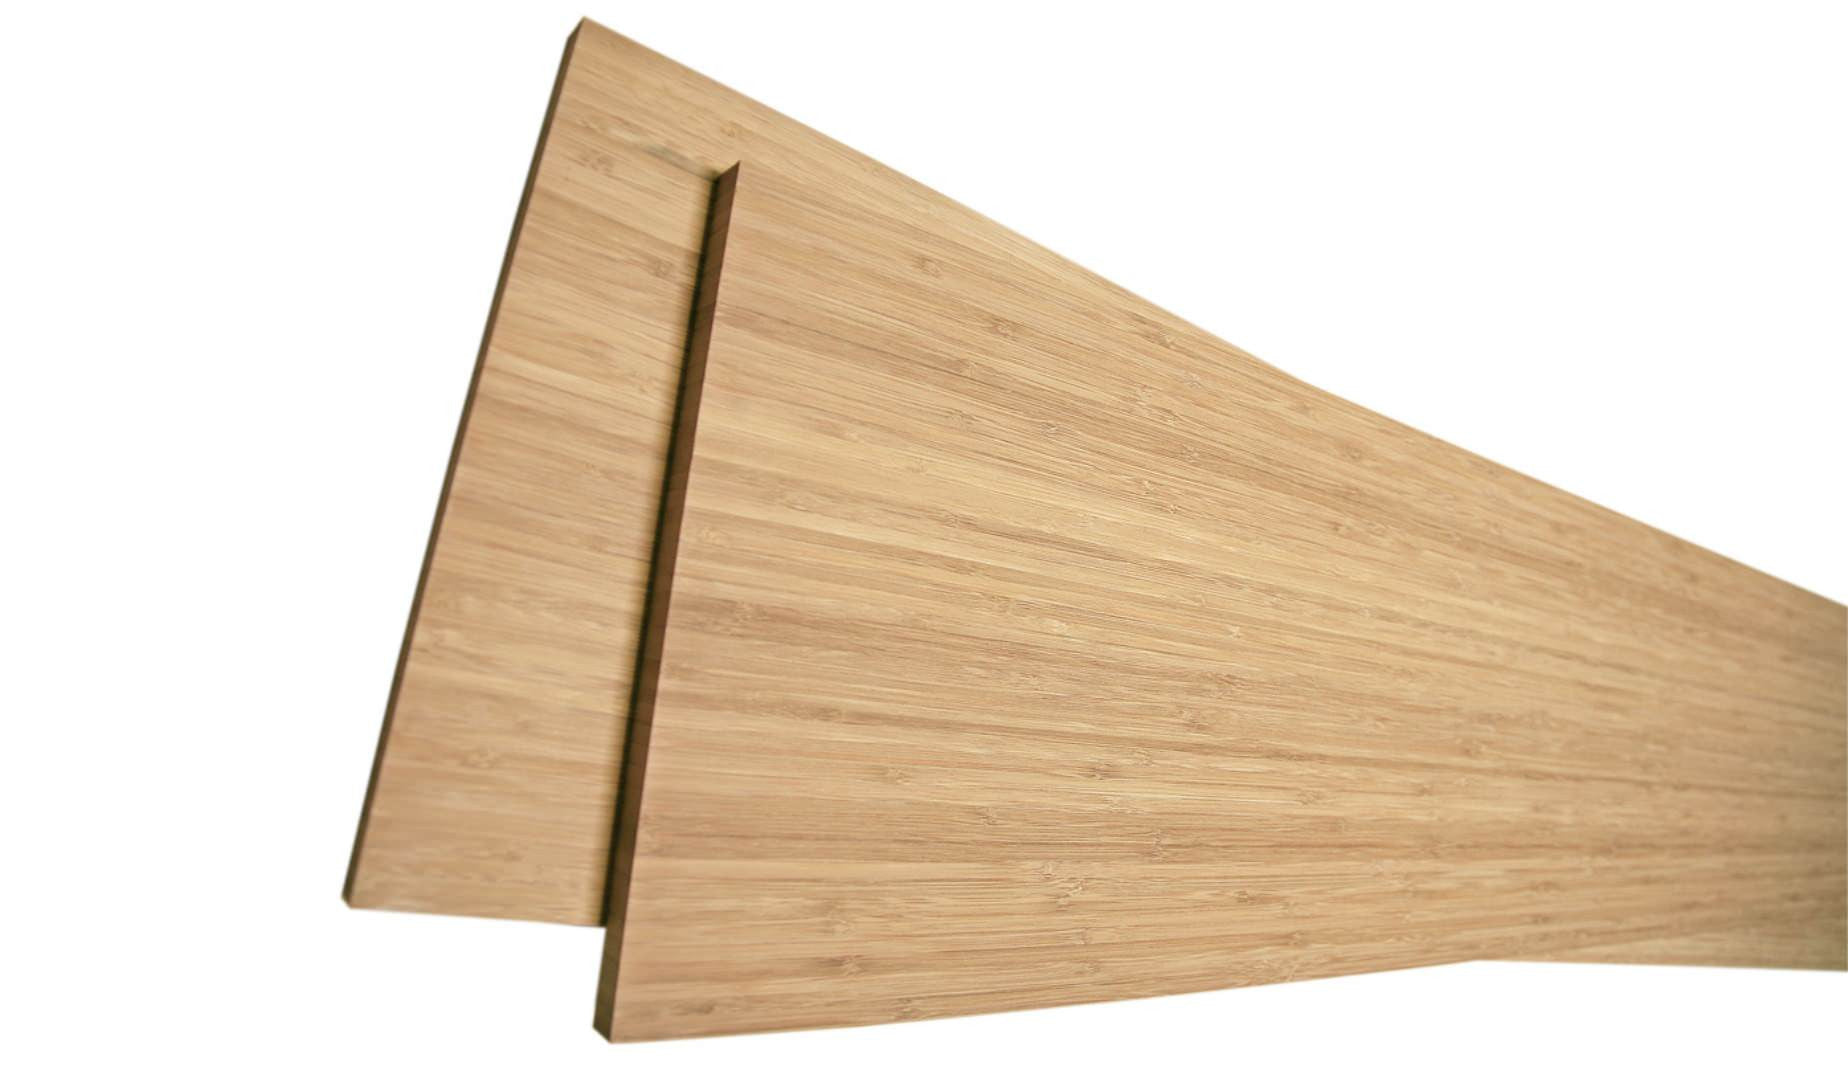 Bamboo sheets used as skateboard building material